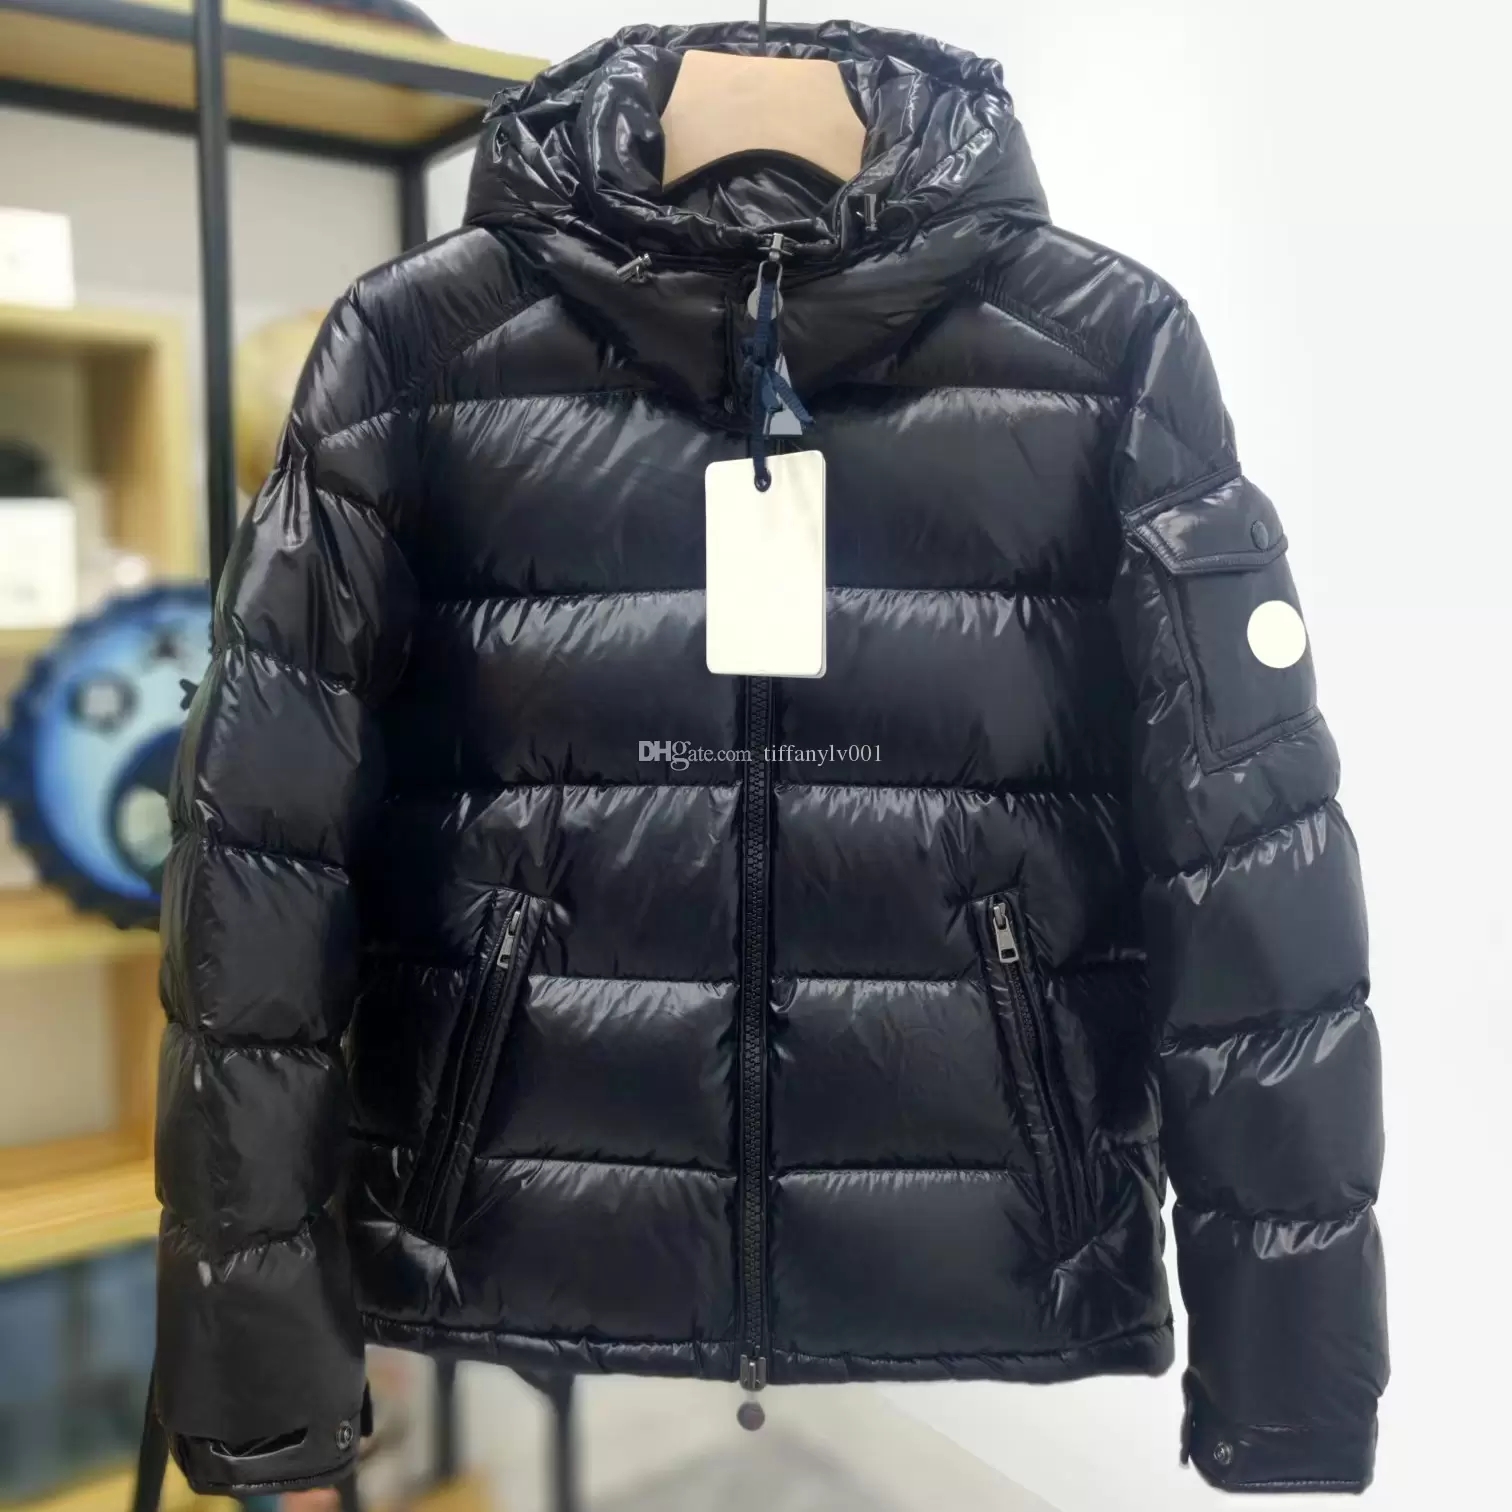 

Men's  down jackets Sleepwear Additional Pay on Your Order Your Payment is Protected by DH VIP customer-specific payed link, 7 pieces